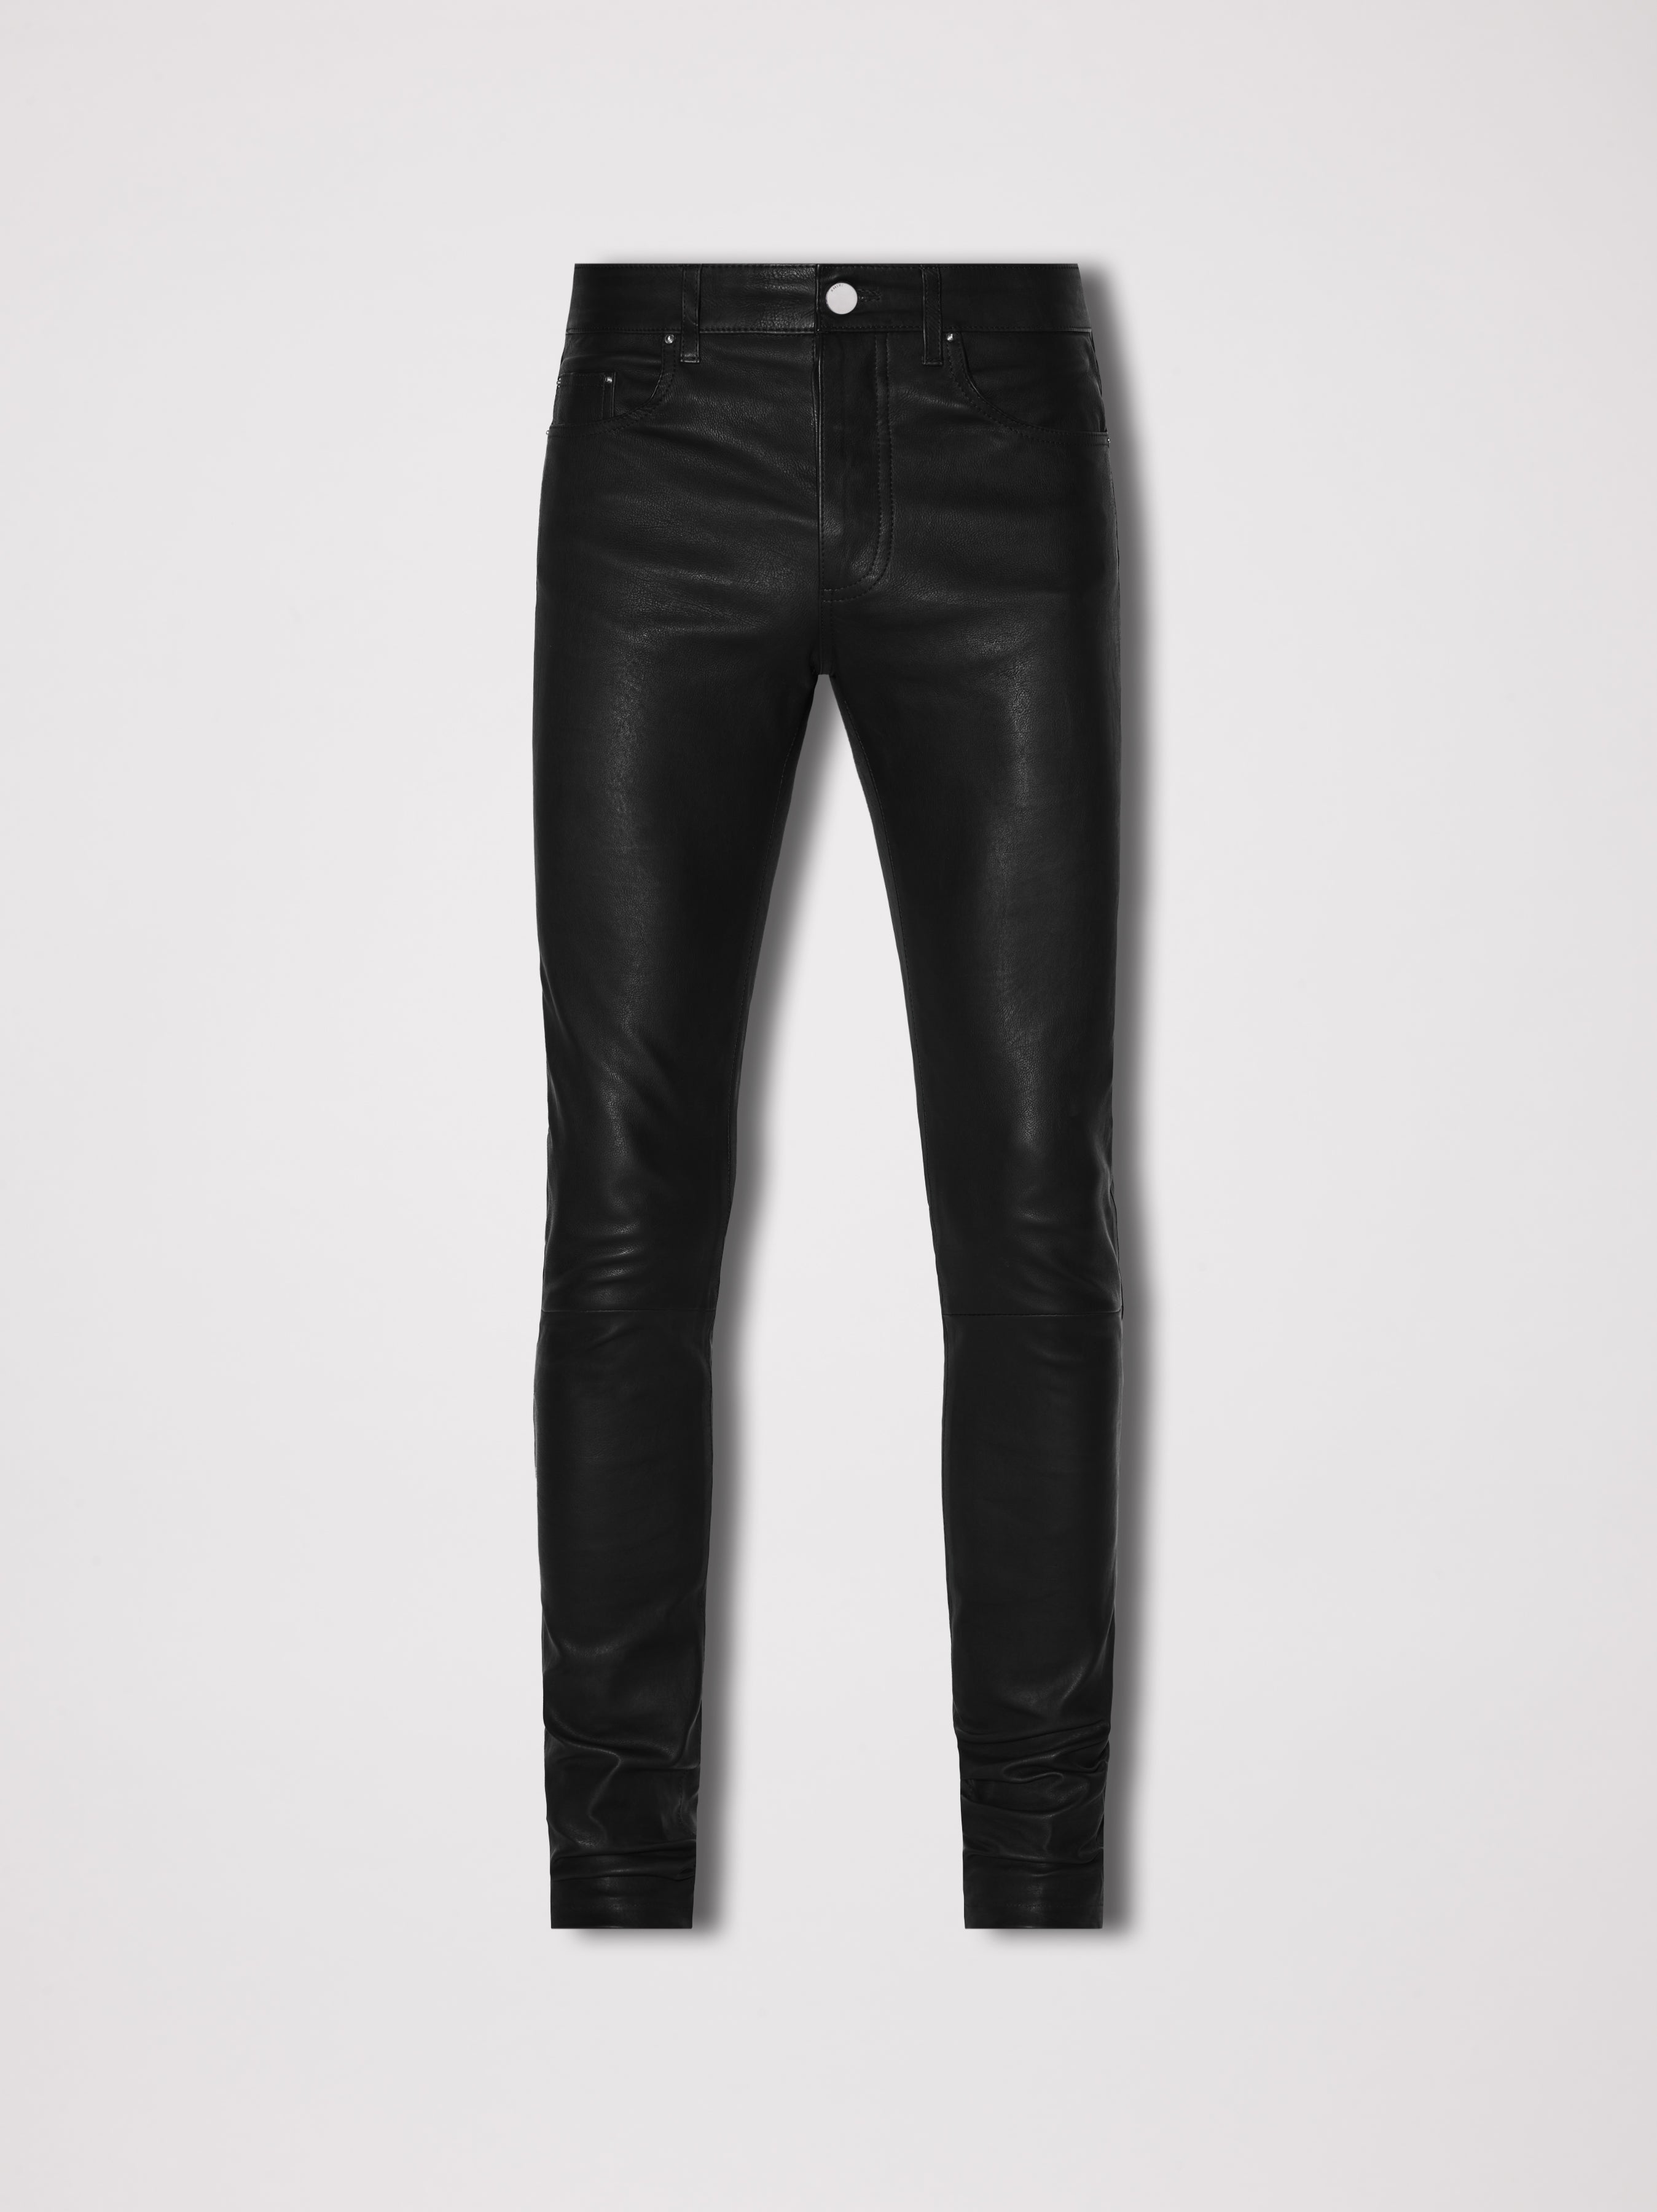 Product 5 POCKET LEATHER PANT - BLACK featured image